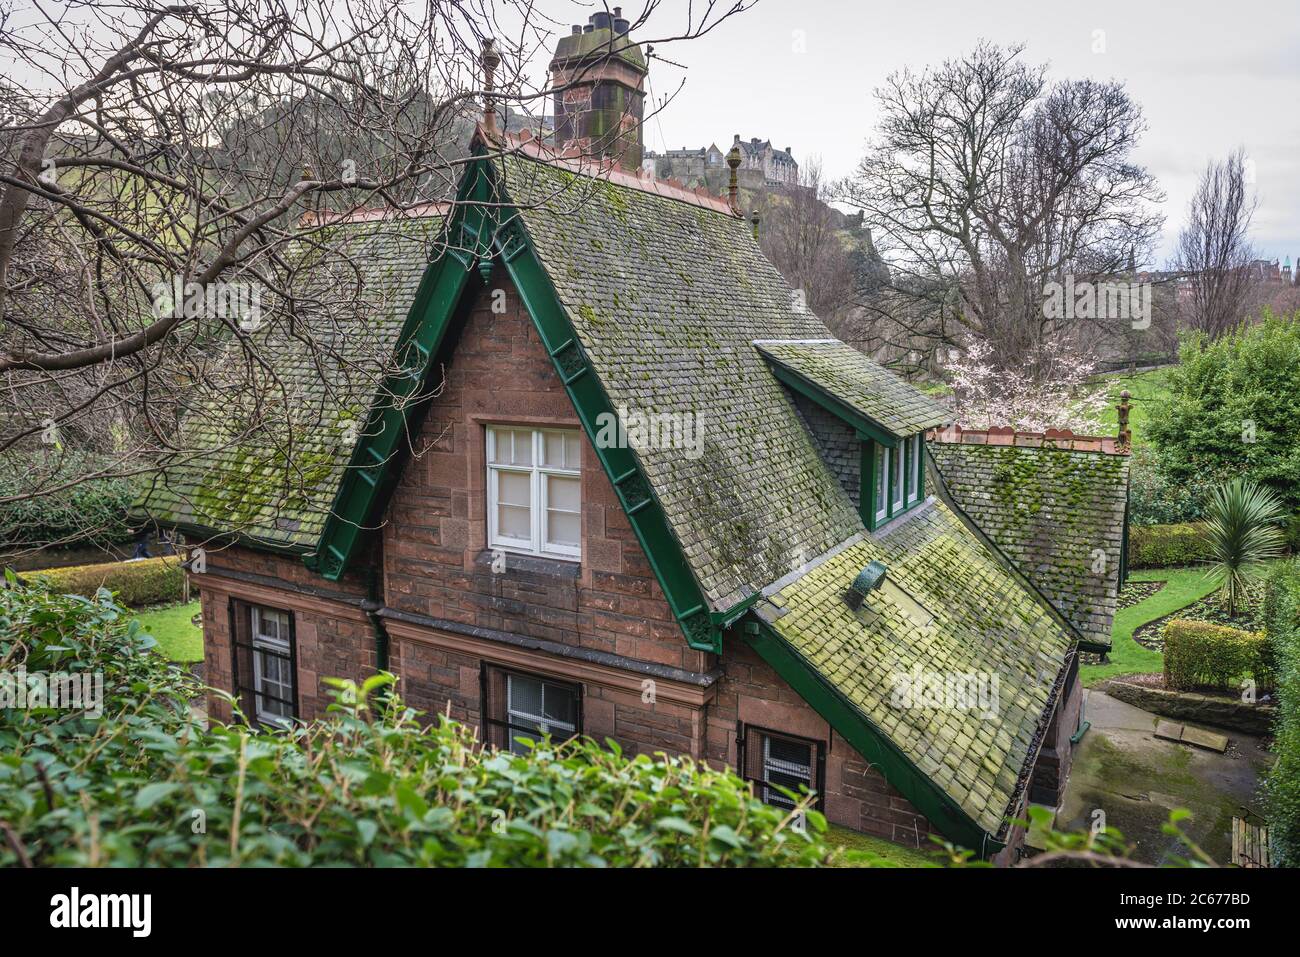 Head Gardeners cottage also known as Great Aunt Lizzies house in Princes Street Gardens public park in Edinburgh, the capital of Scotland, part of UK Stock Photo